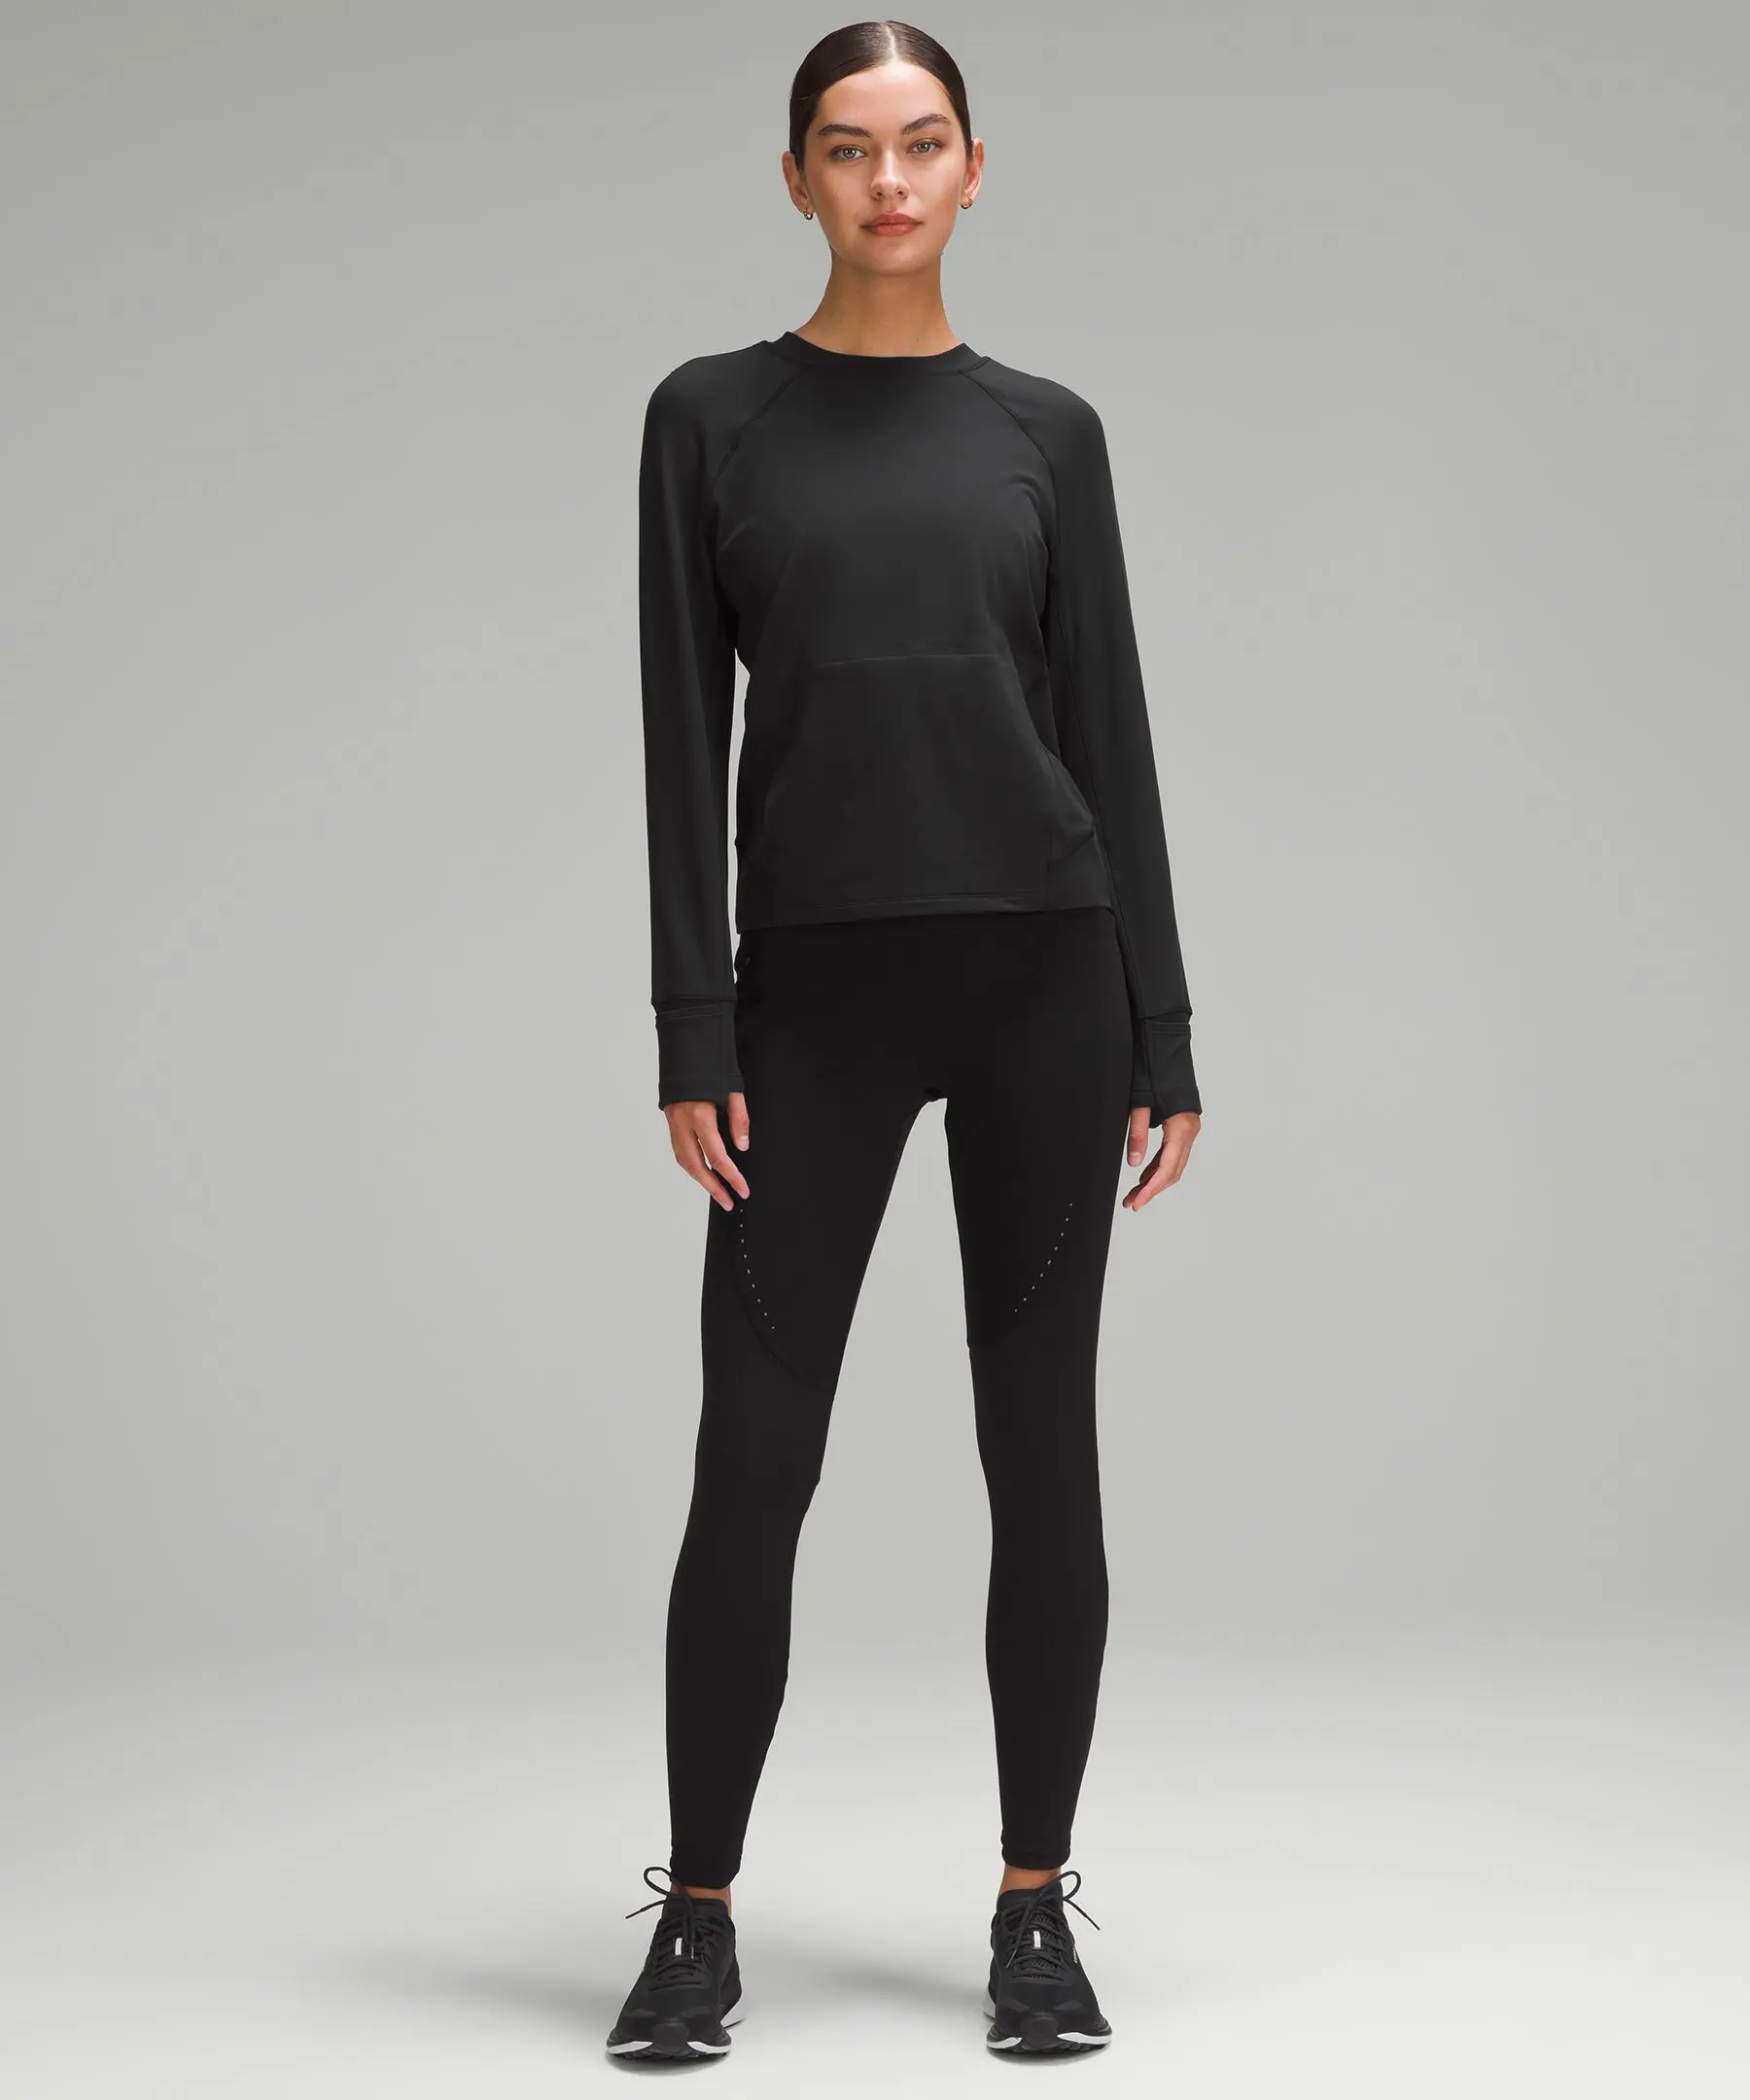 Lululemon Cold Weather High-Rise Running Tight 28". 2